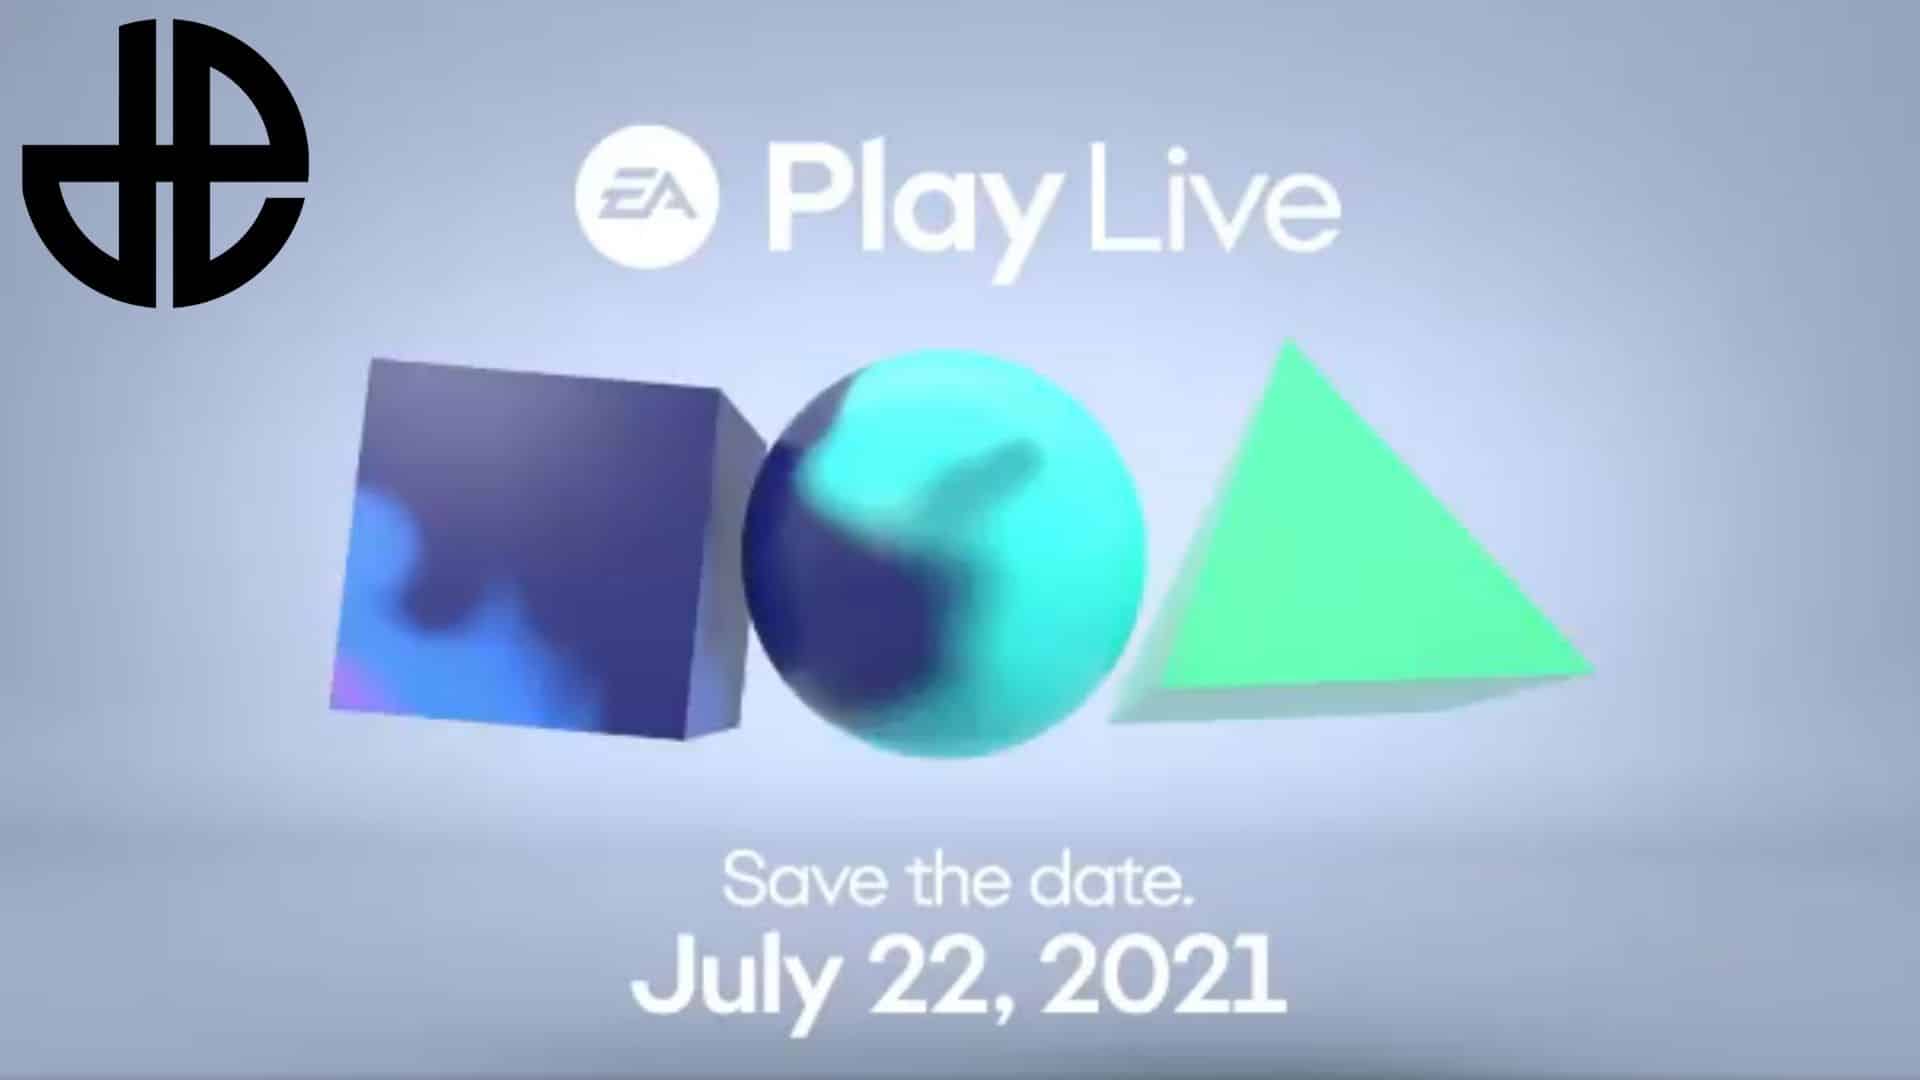 EA Play Live event